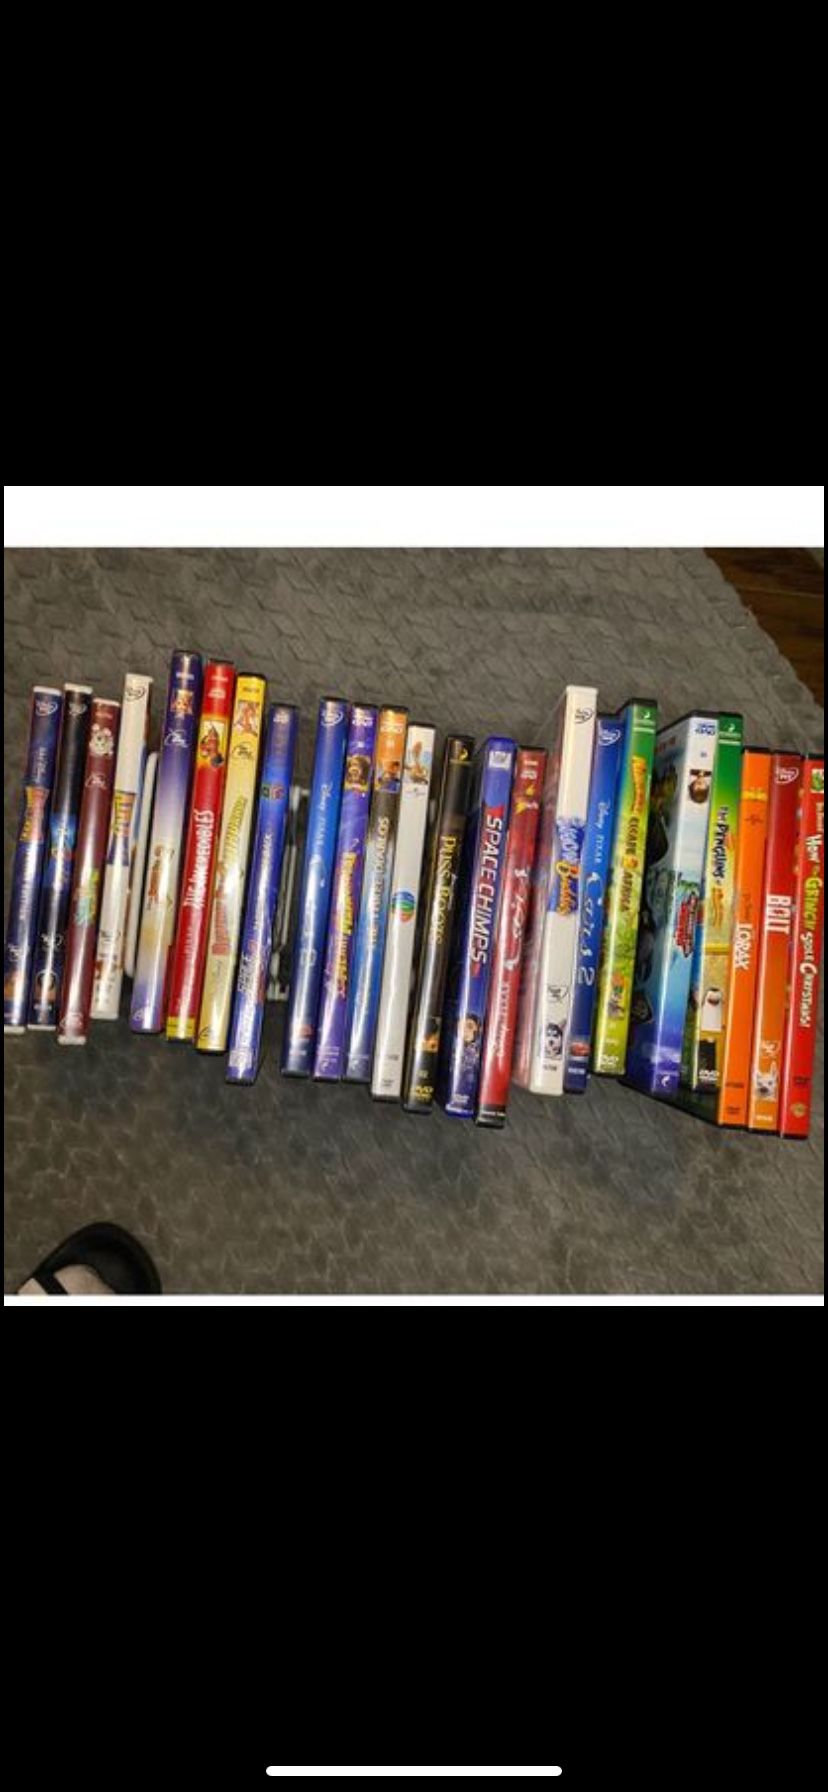 Classic Kids Movie Bundle! 23 DVDs from Disney DreamWorks, Dr. Suess, & more!